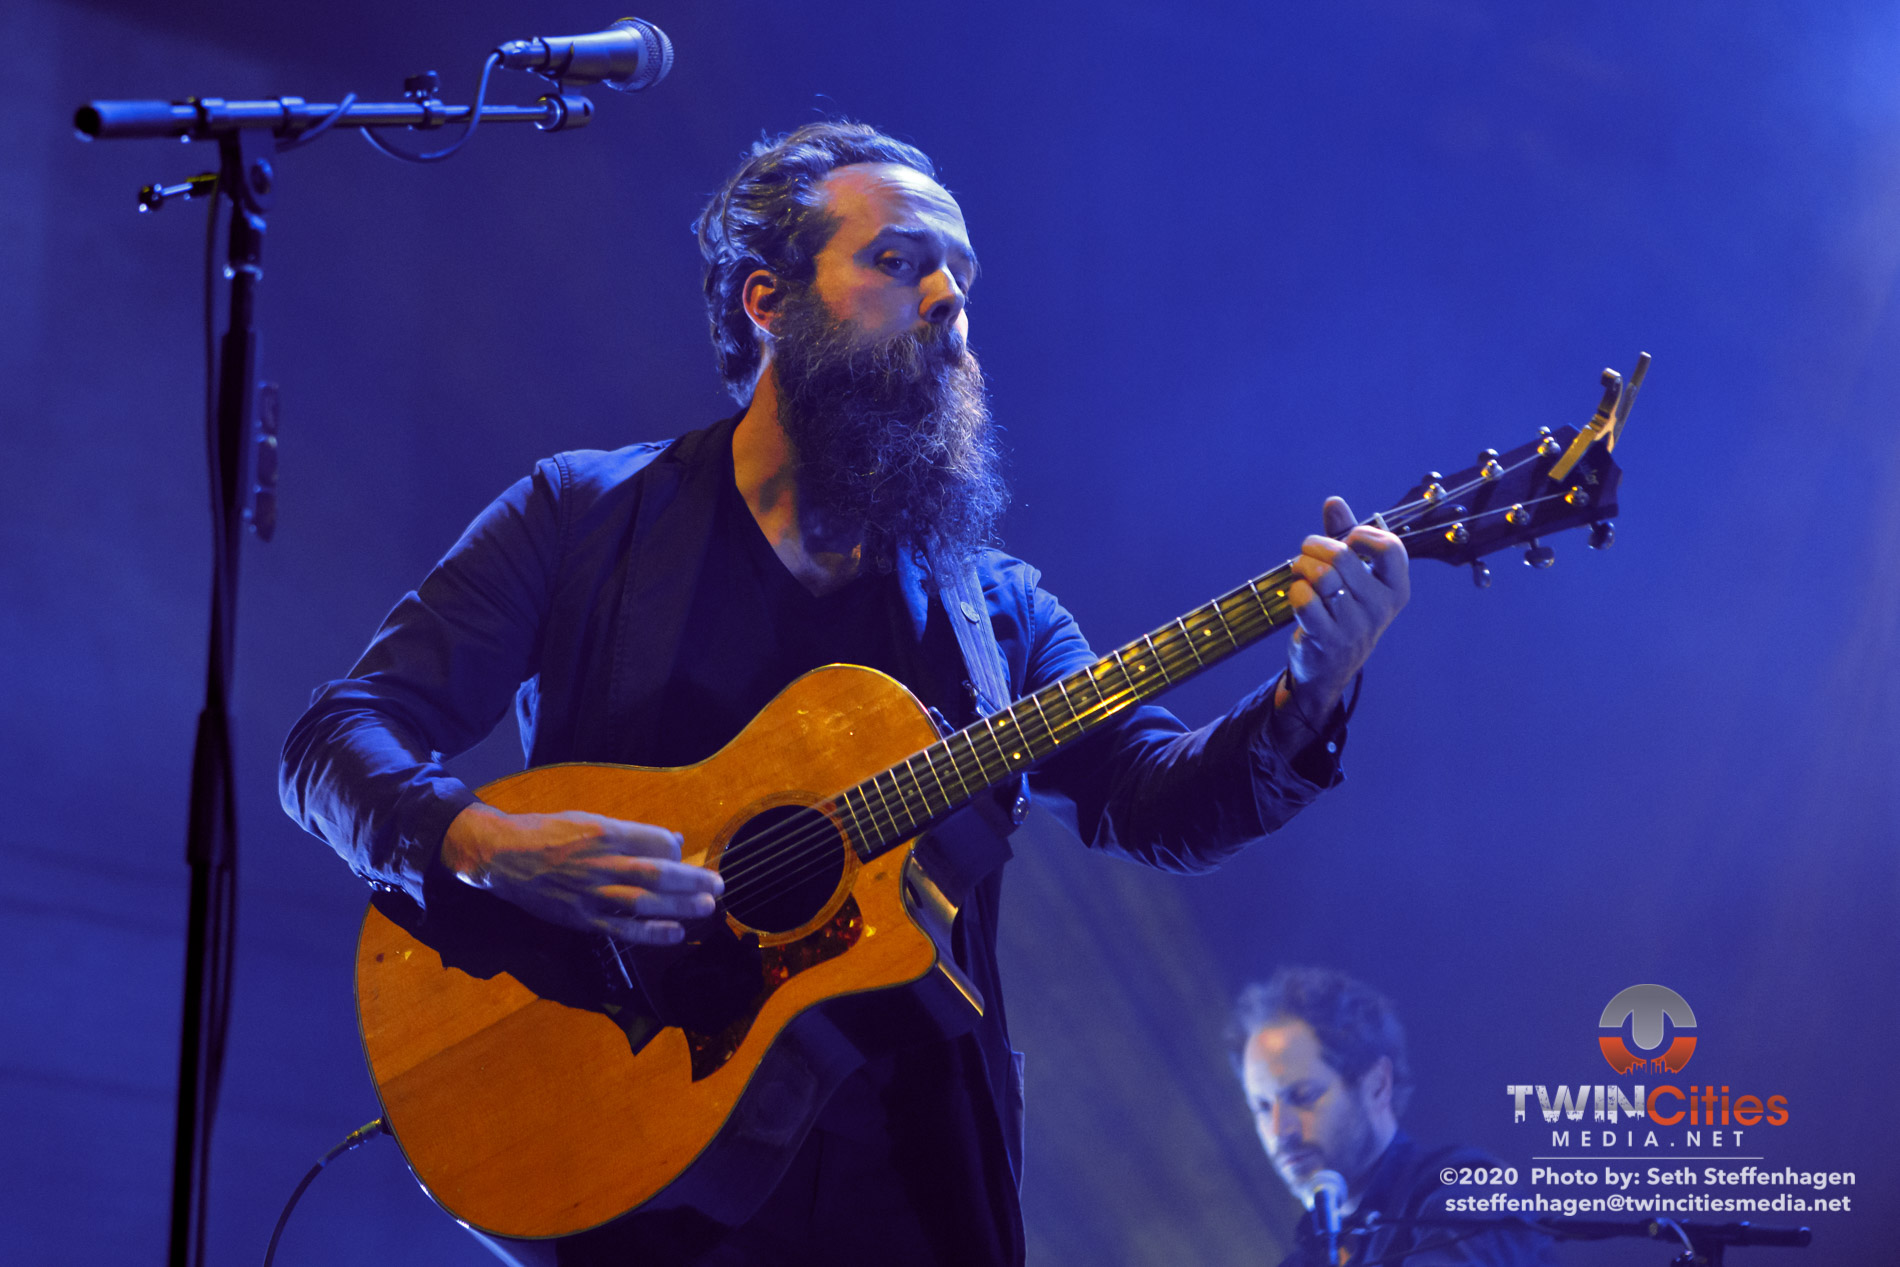 February 14, 2020 - Saint Paul, Minnesota, United States - Calexico And Iron & Wine live in concert at the Palace Theatre along with Madison Cunningham as the opener.

(Photo by Seth Steffenhagen/Steffenhagen Photography)